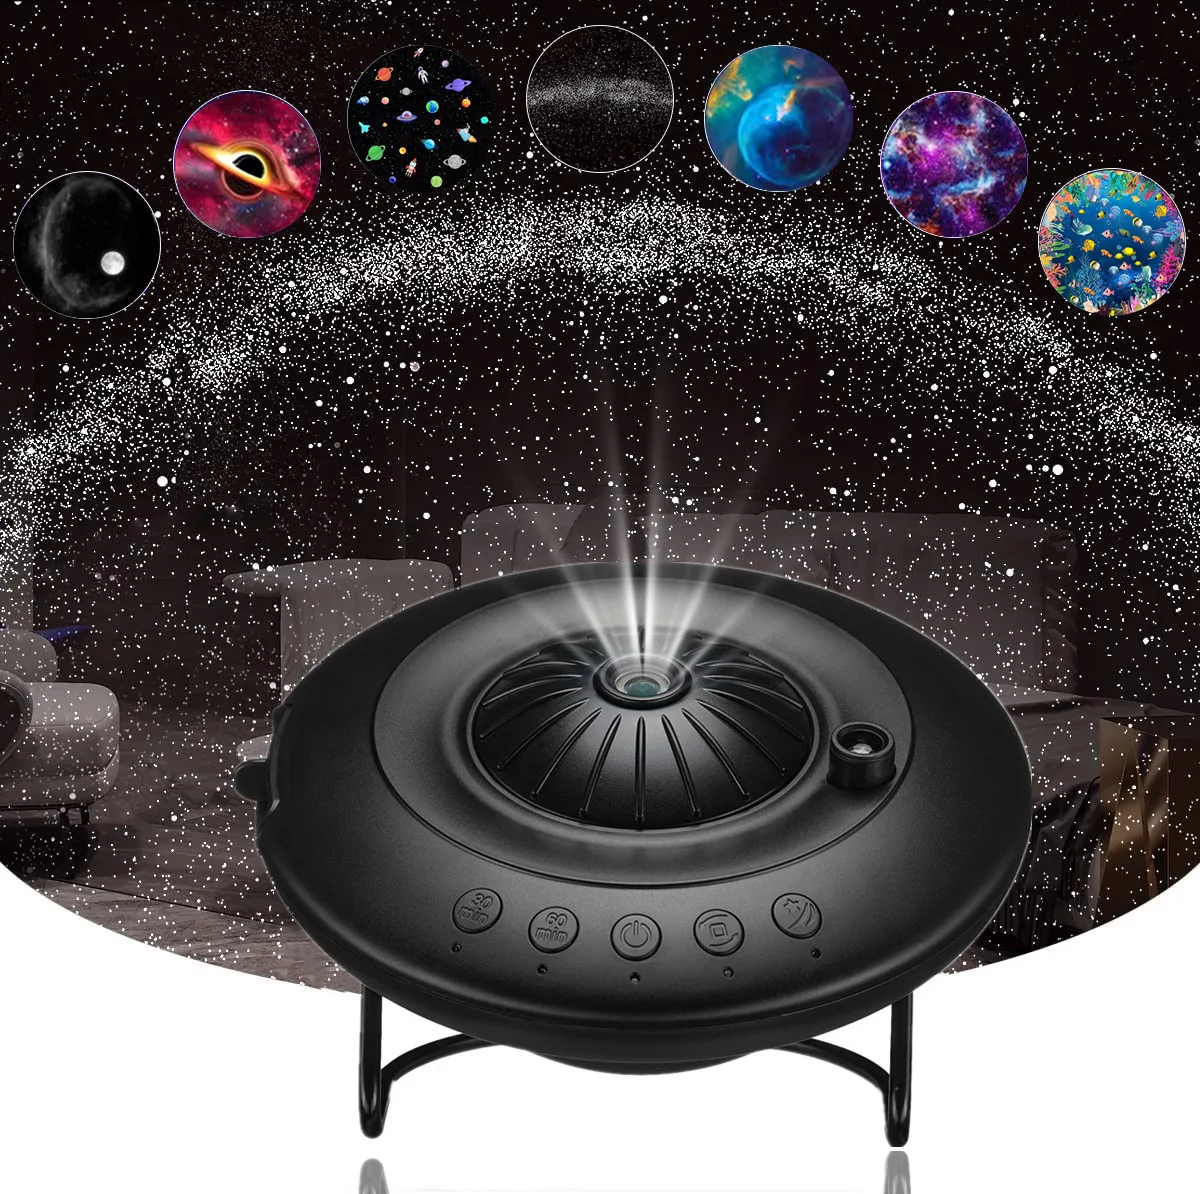 Star Planetarium Projector 6 in 1 Galaxy Projector Night Lights 360° Adjustable Projector for Kids Bedroom Ceiling Home Theater